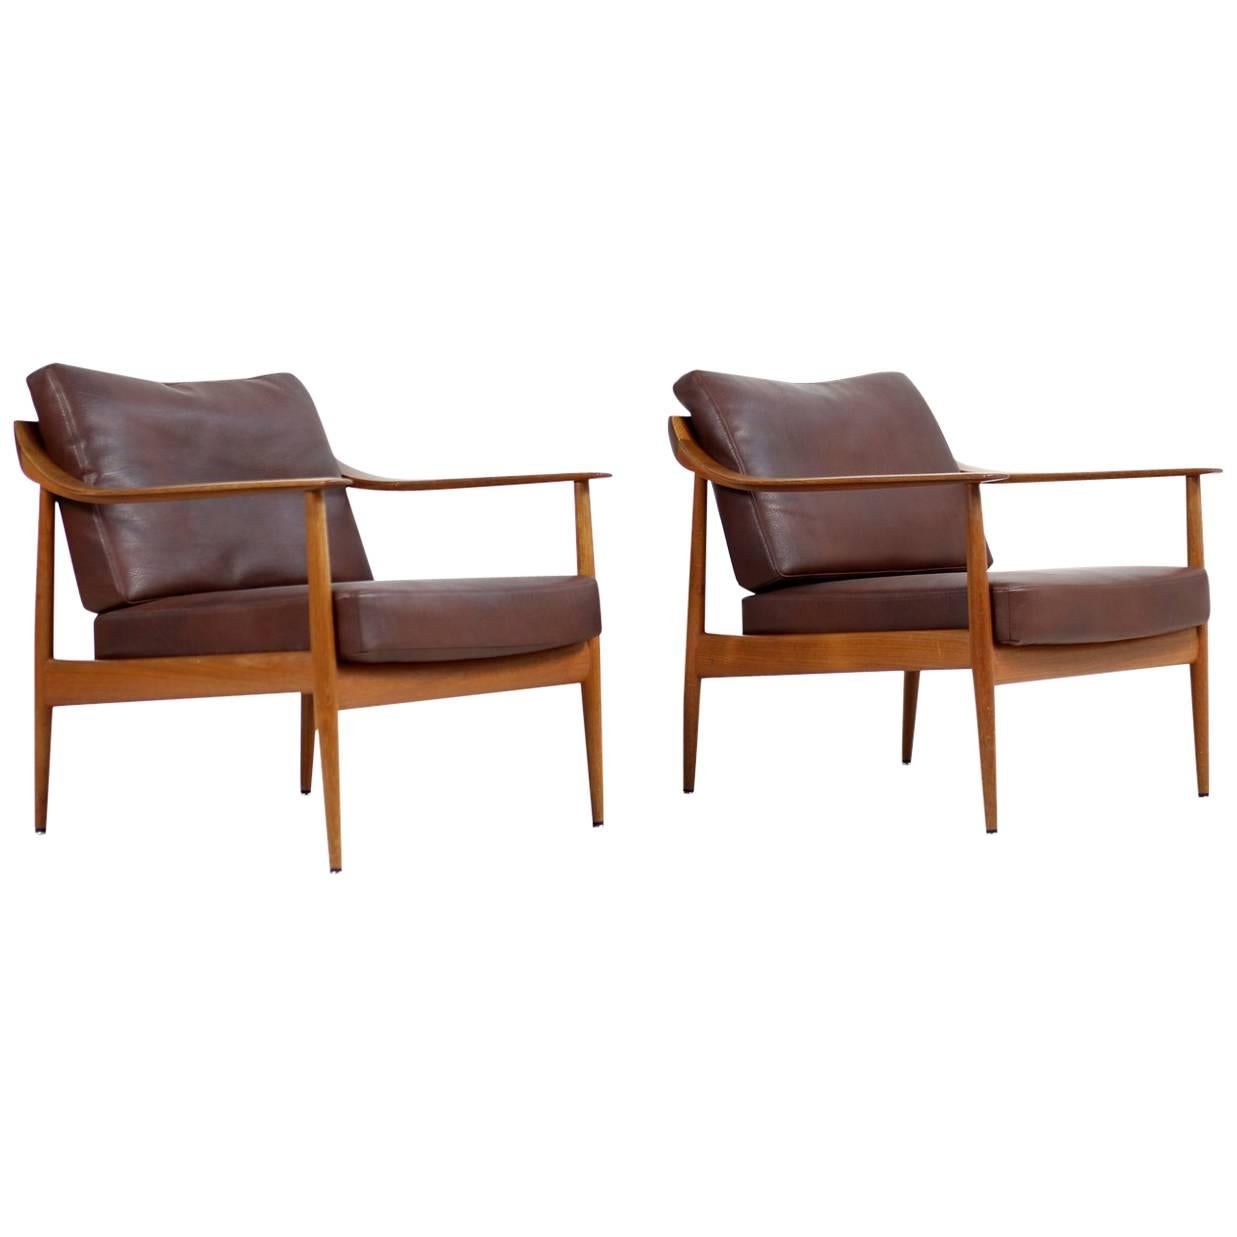 Pair of 1960s Teak & Leather Easy Lounge Chairs Knoll Antimott Mid-Century